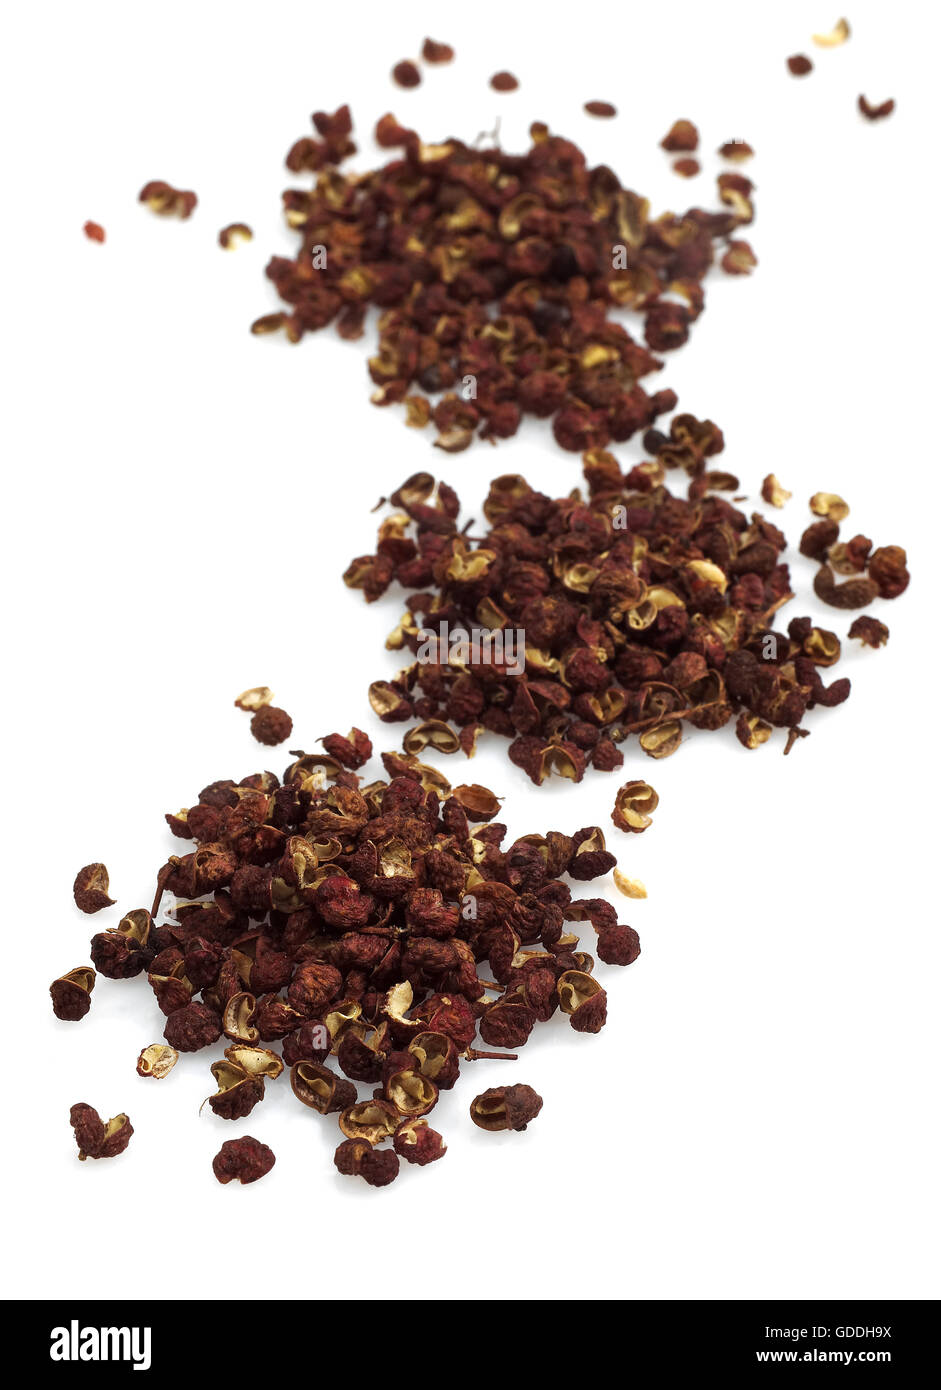 Szechuan or Sichuan Pepper, zanthoxylum simulans, Asiatic Spice against White Background Stock Photo